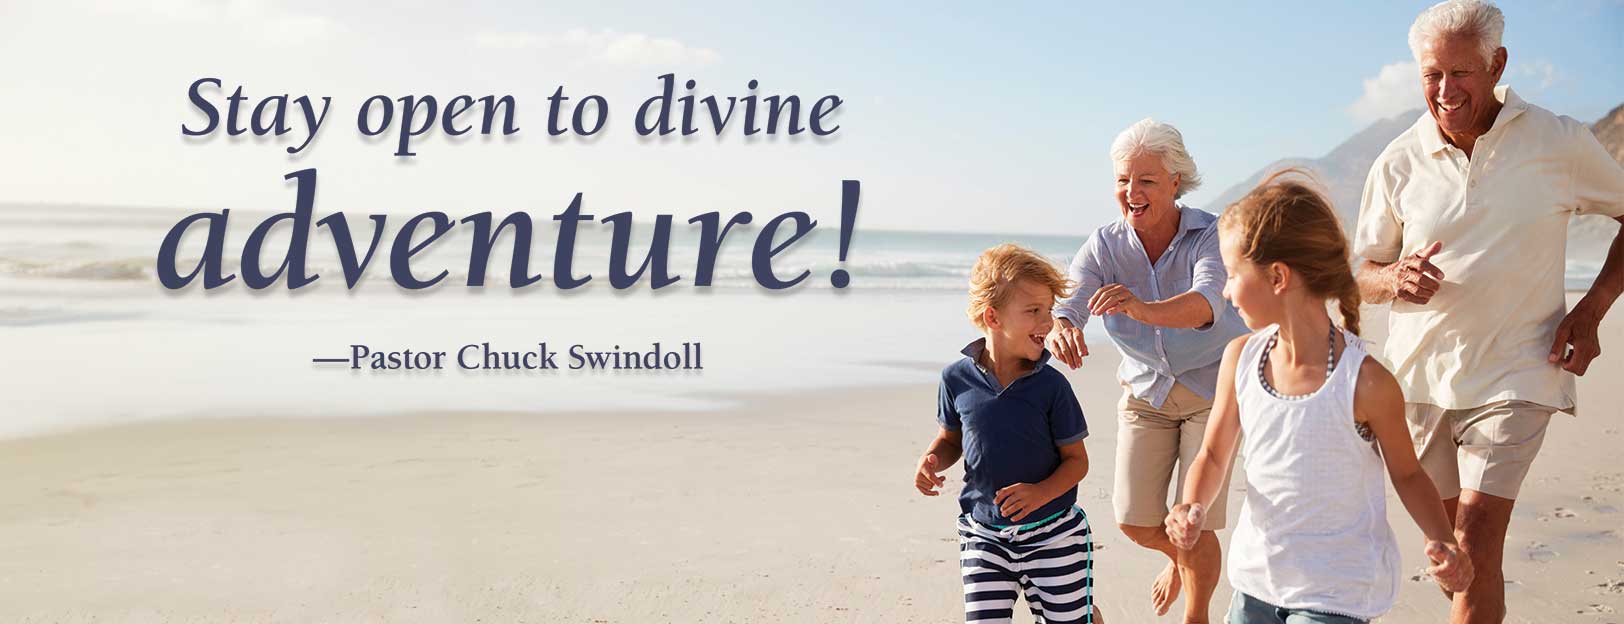 Stay open to divine adventure!